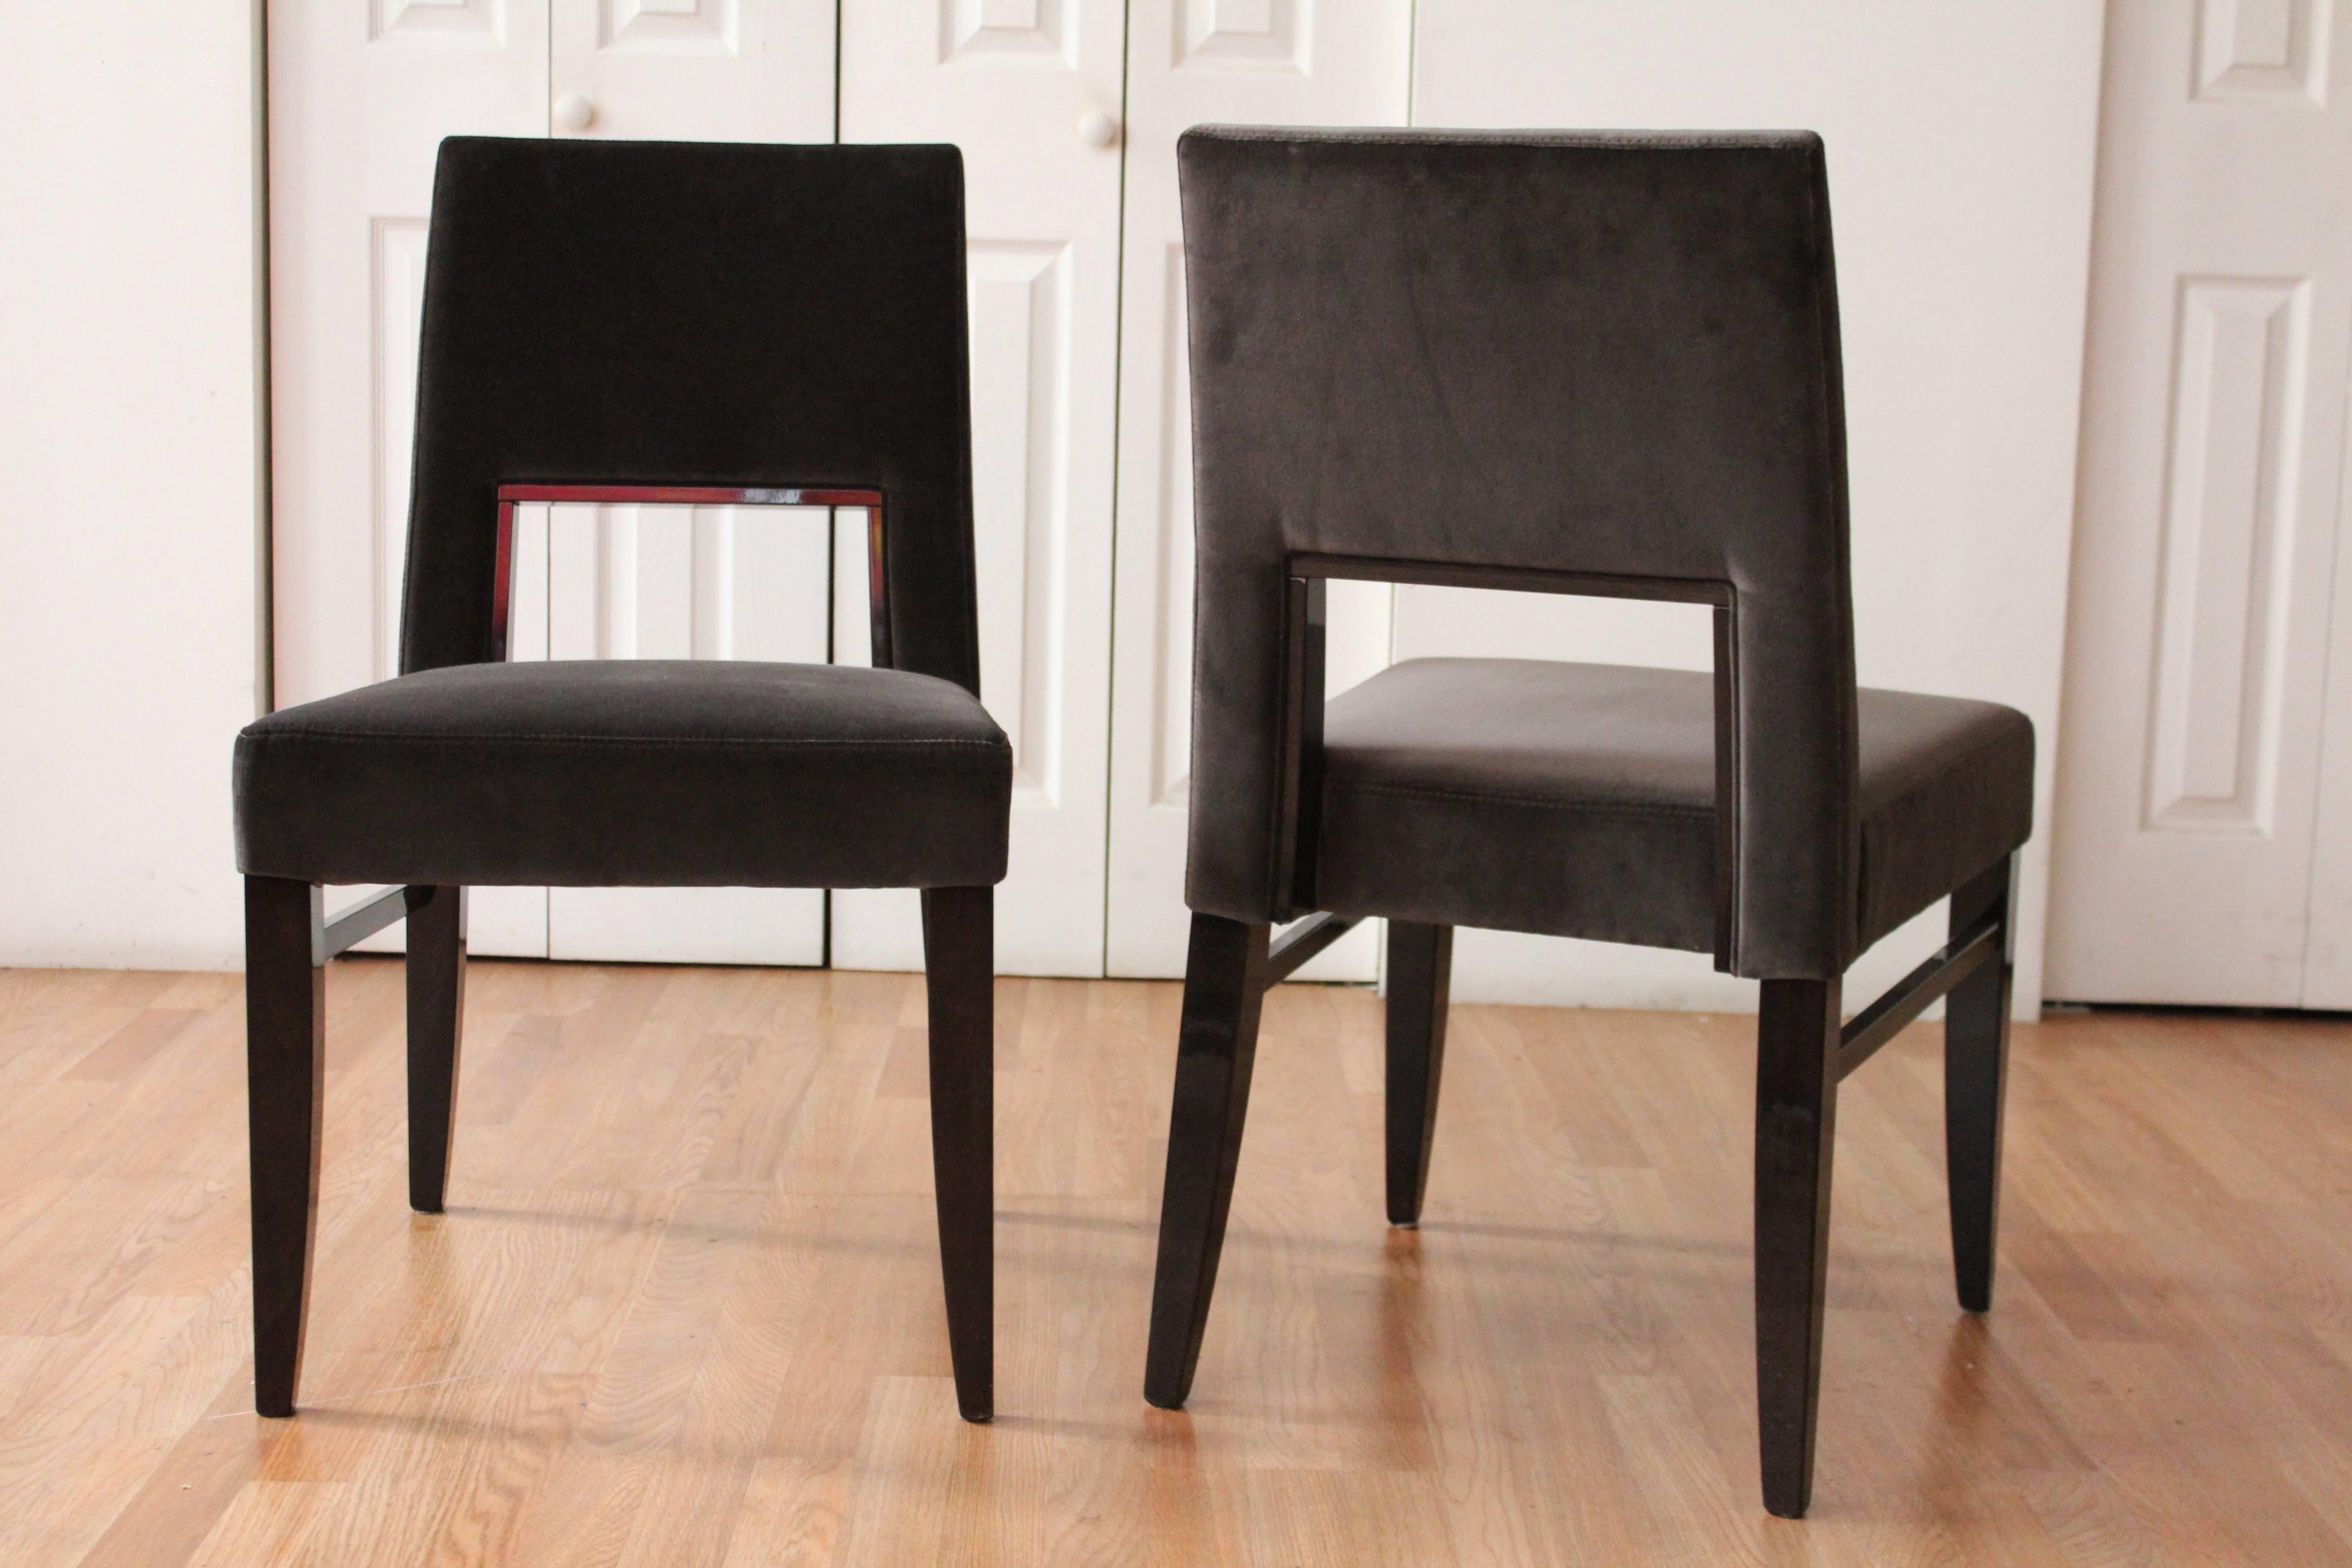 Costantini Pietro produces some of the highest quality, contemporary dining chairs that Italy has to offer. The 